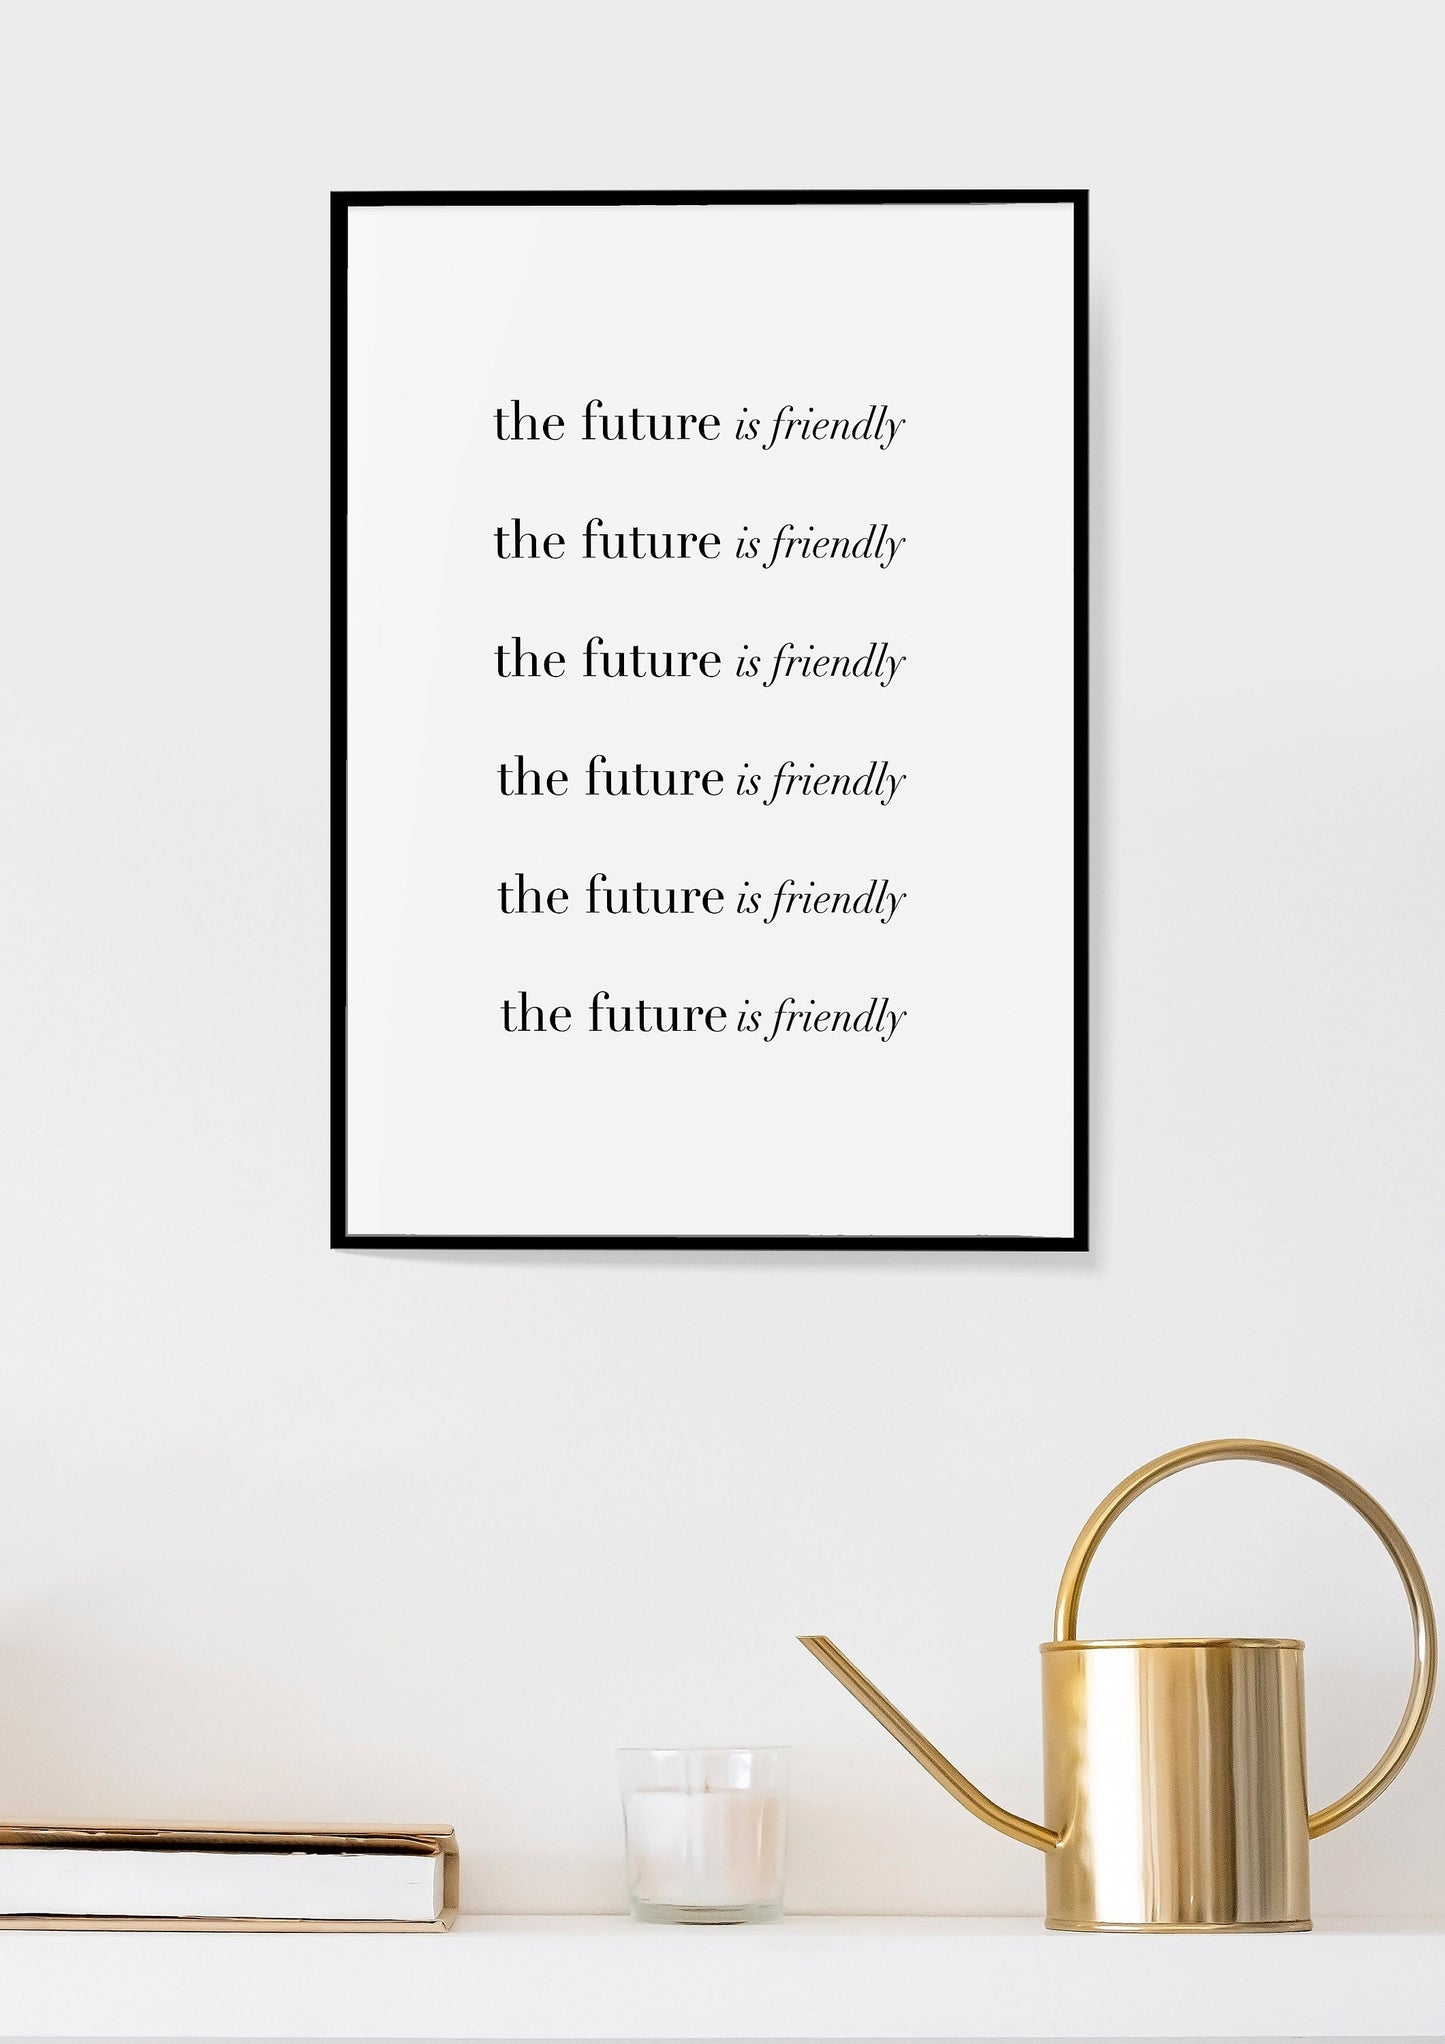 The future is friendly,Inspirational quote print,Motivational quote,Encouragement gift,Hippie print,Retro wall art,Boho print,Positivity